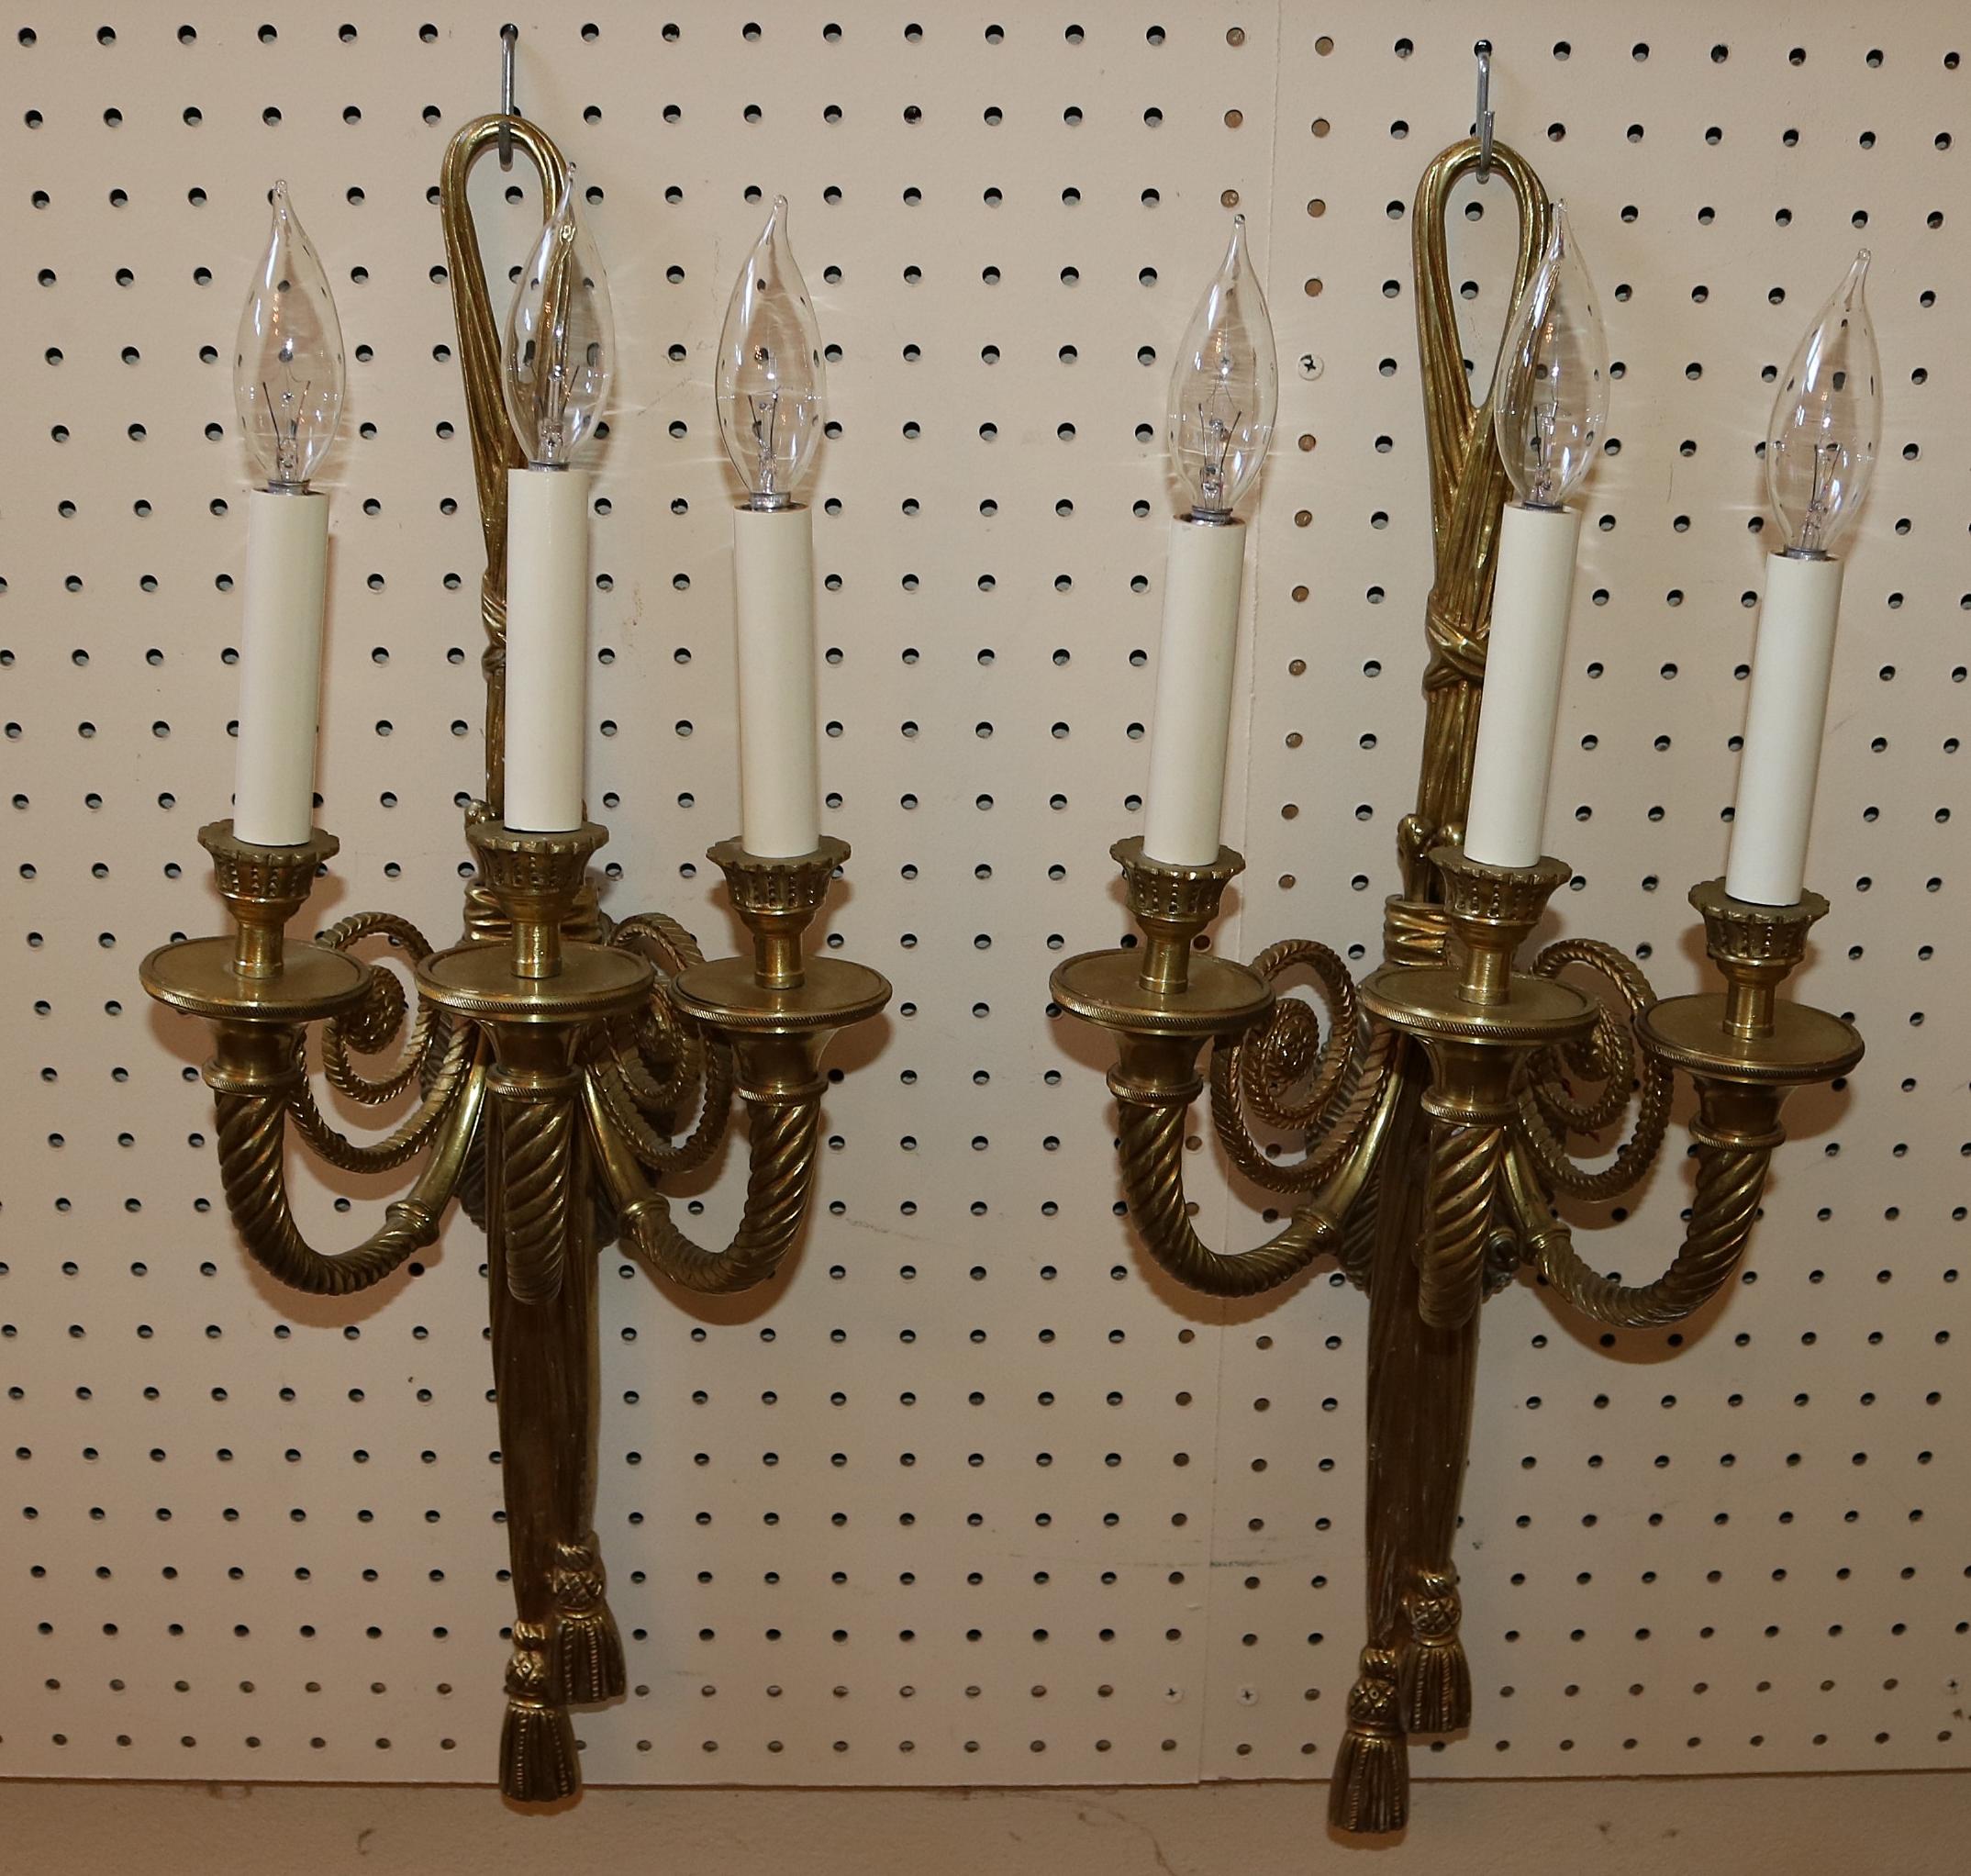 ​Stunning Pair of Solid Brass 3 Arm Louis XVI French Style Ribbon Sconces

Dimensions : 24